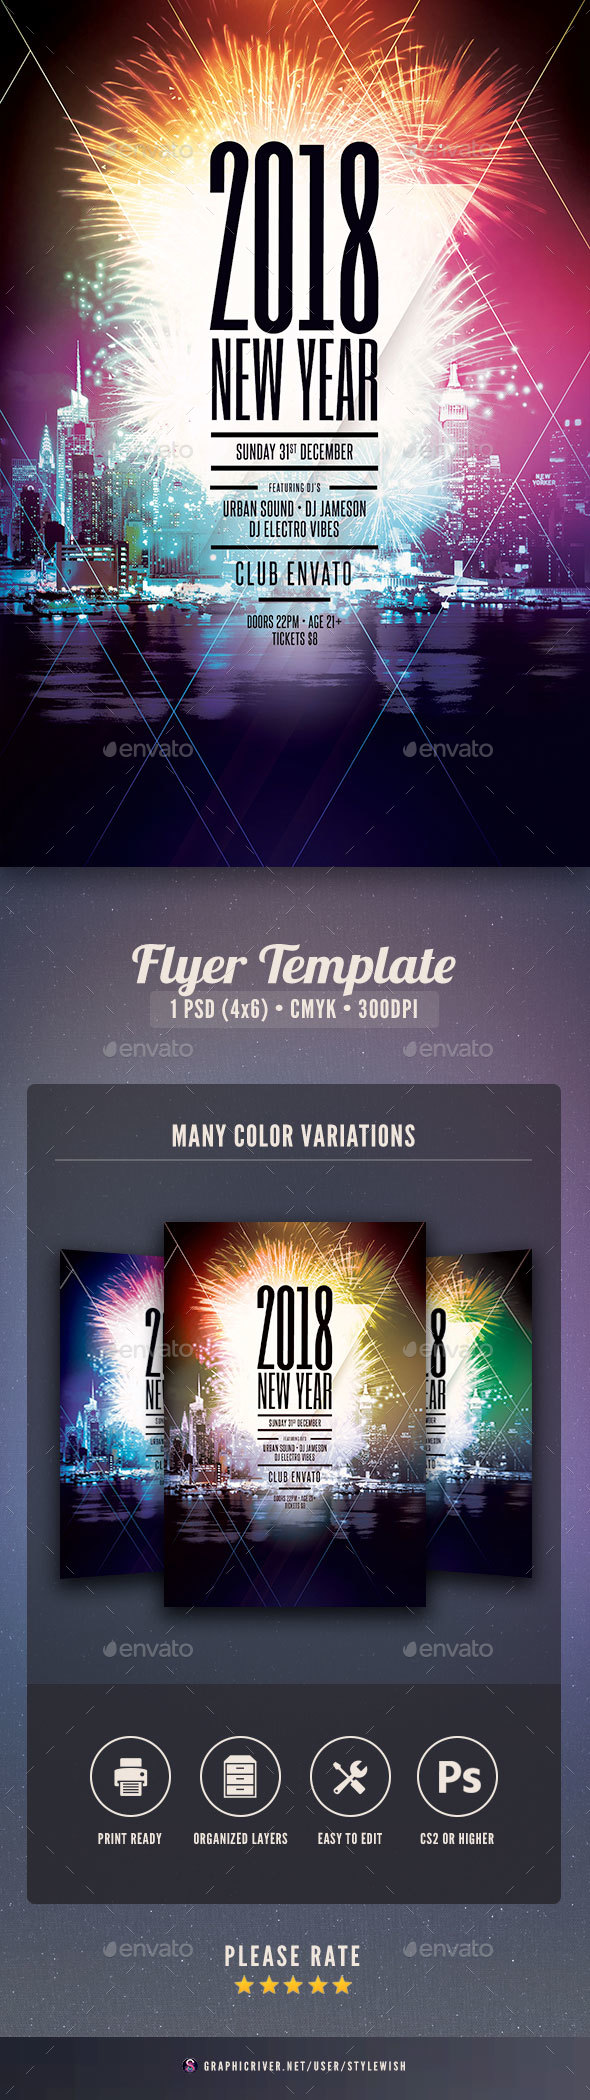 2018 New Year Flyer Template